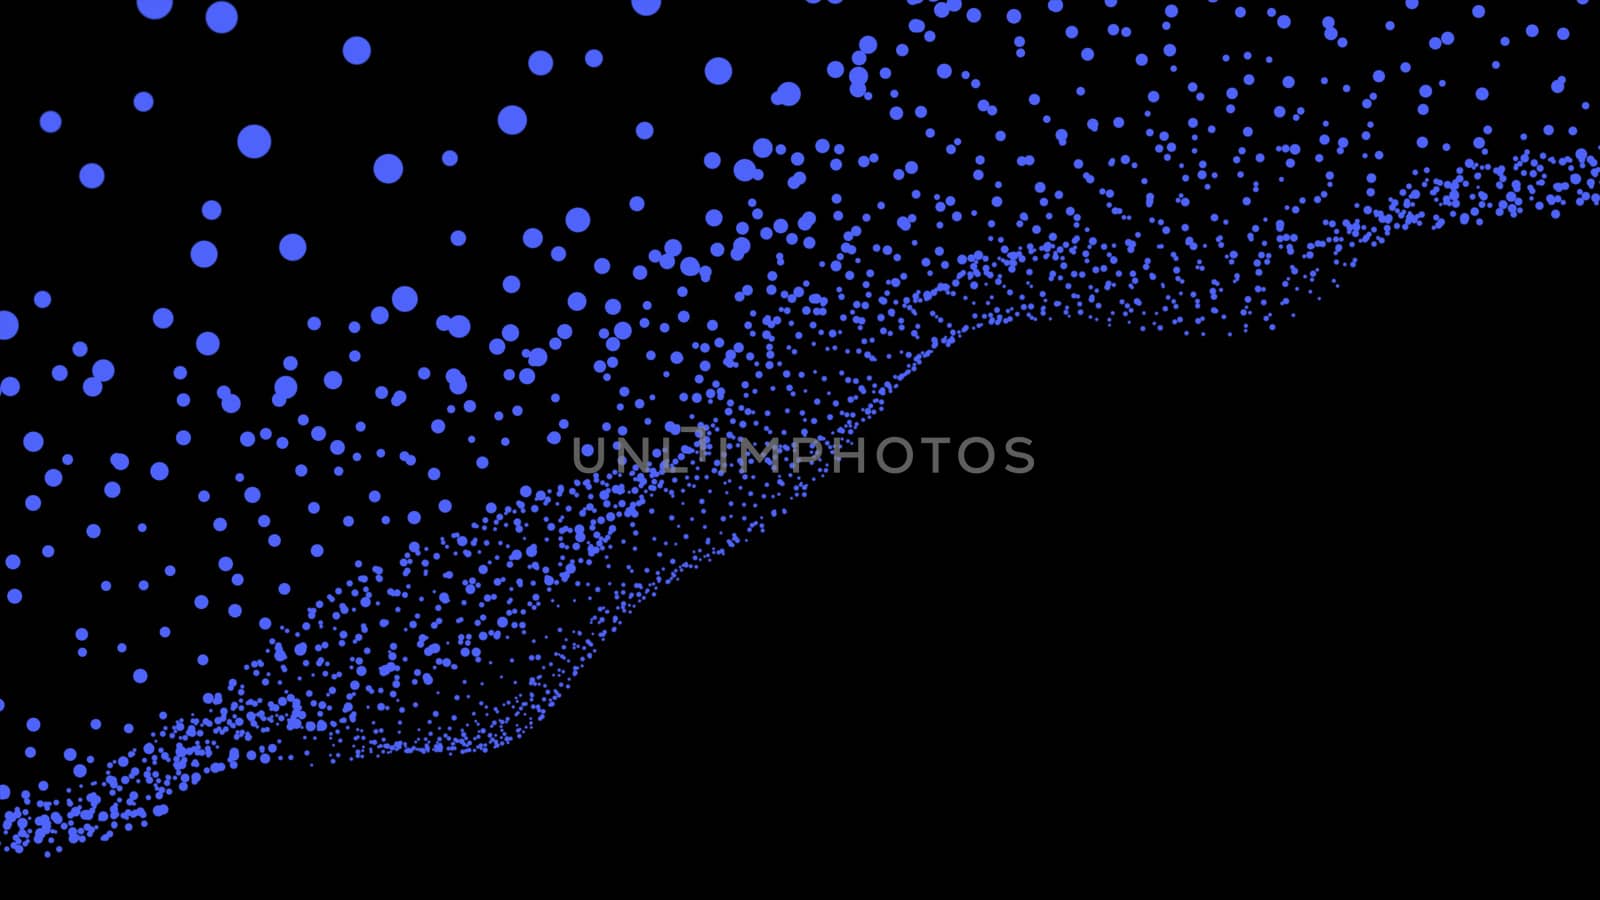 Black abstract texture background with glittery colored shiny bokeh spheres. Sparkling glittered particles on black background for placard, banner and greeting cards.